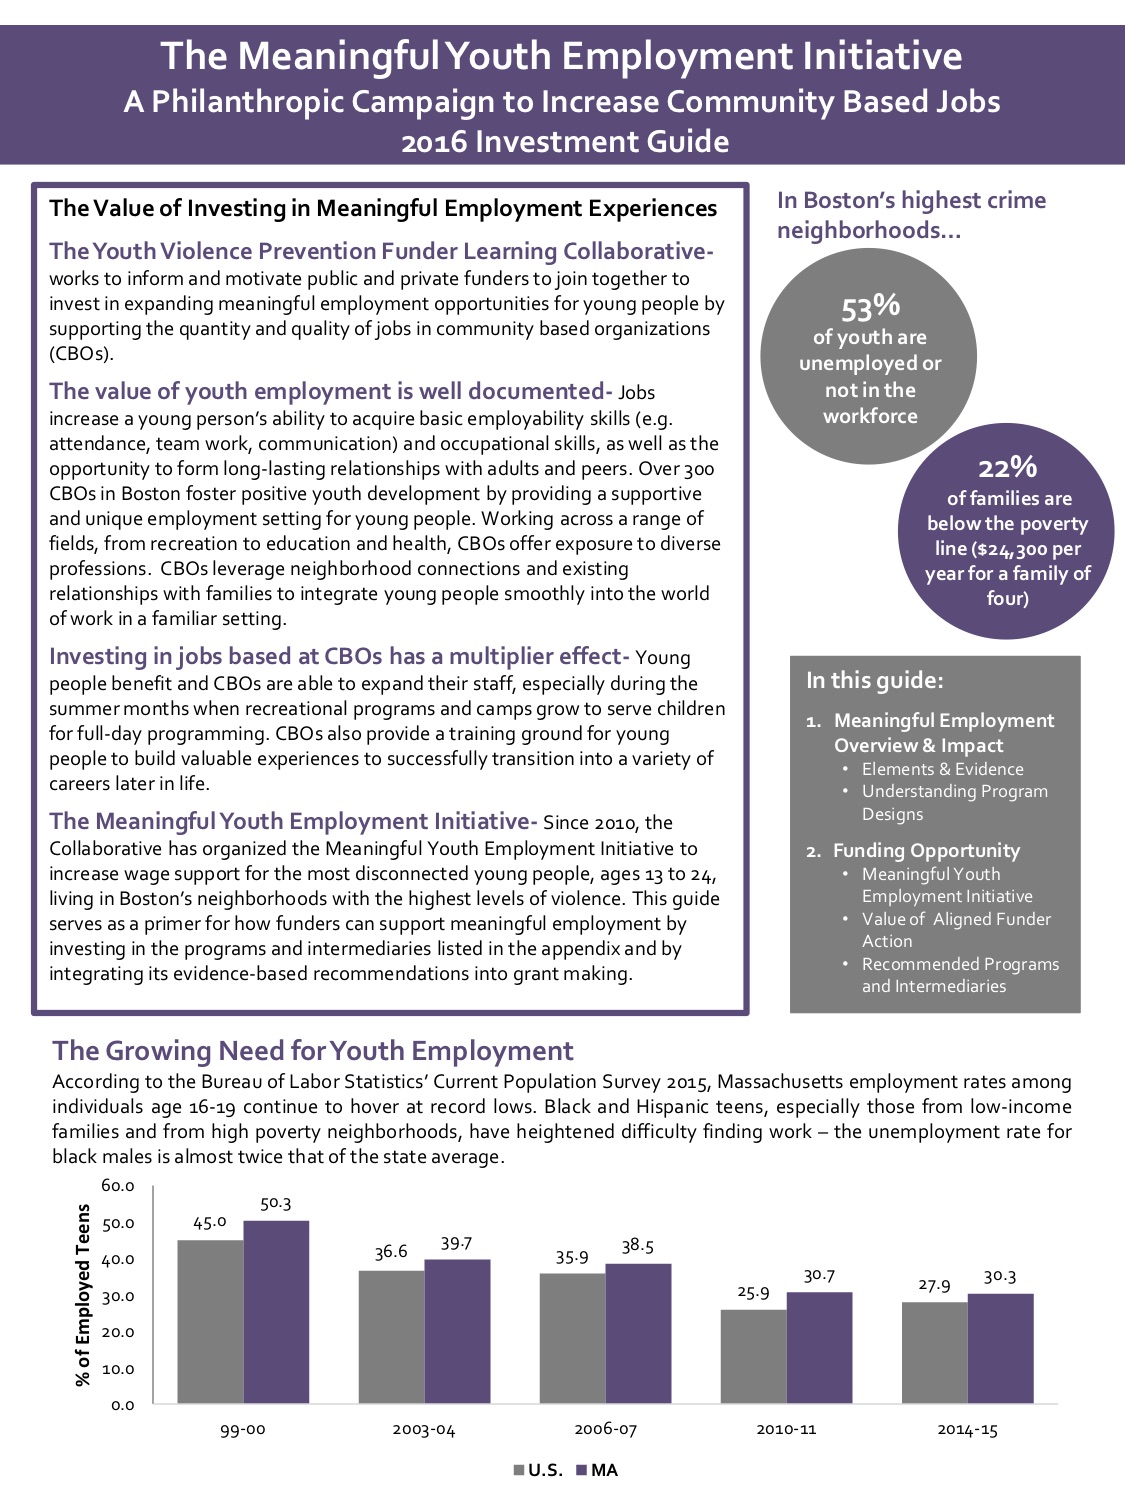 Meaningful Youth Employment Investment Guide 2016